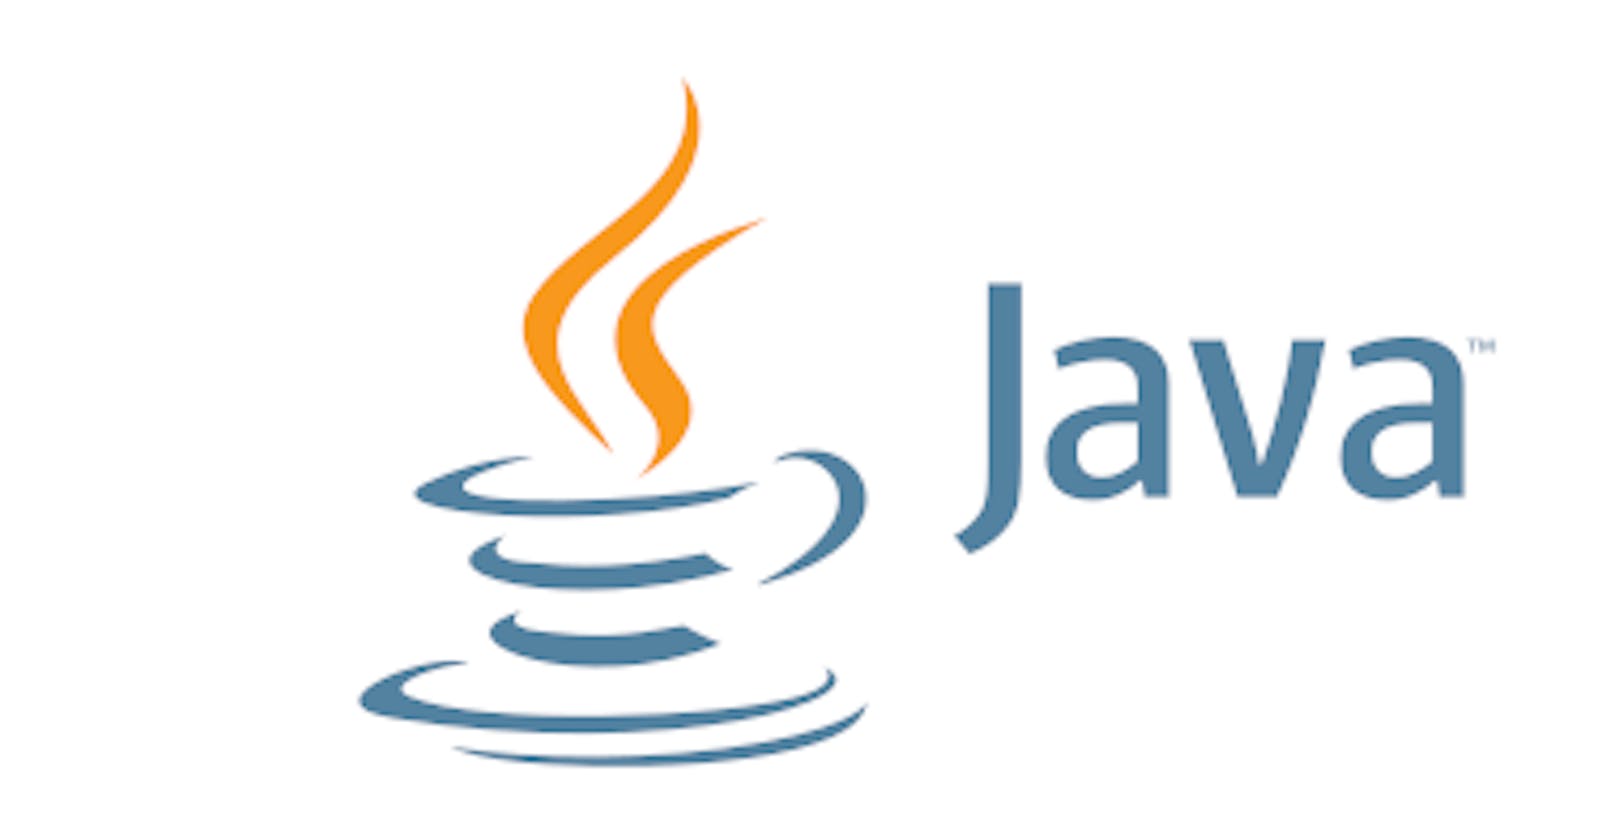 What Is The Meaning of "?" in Java?